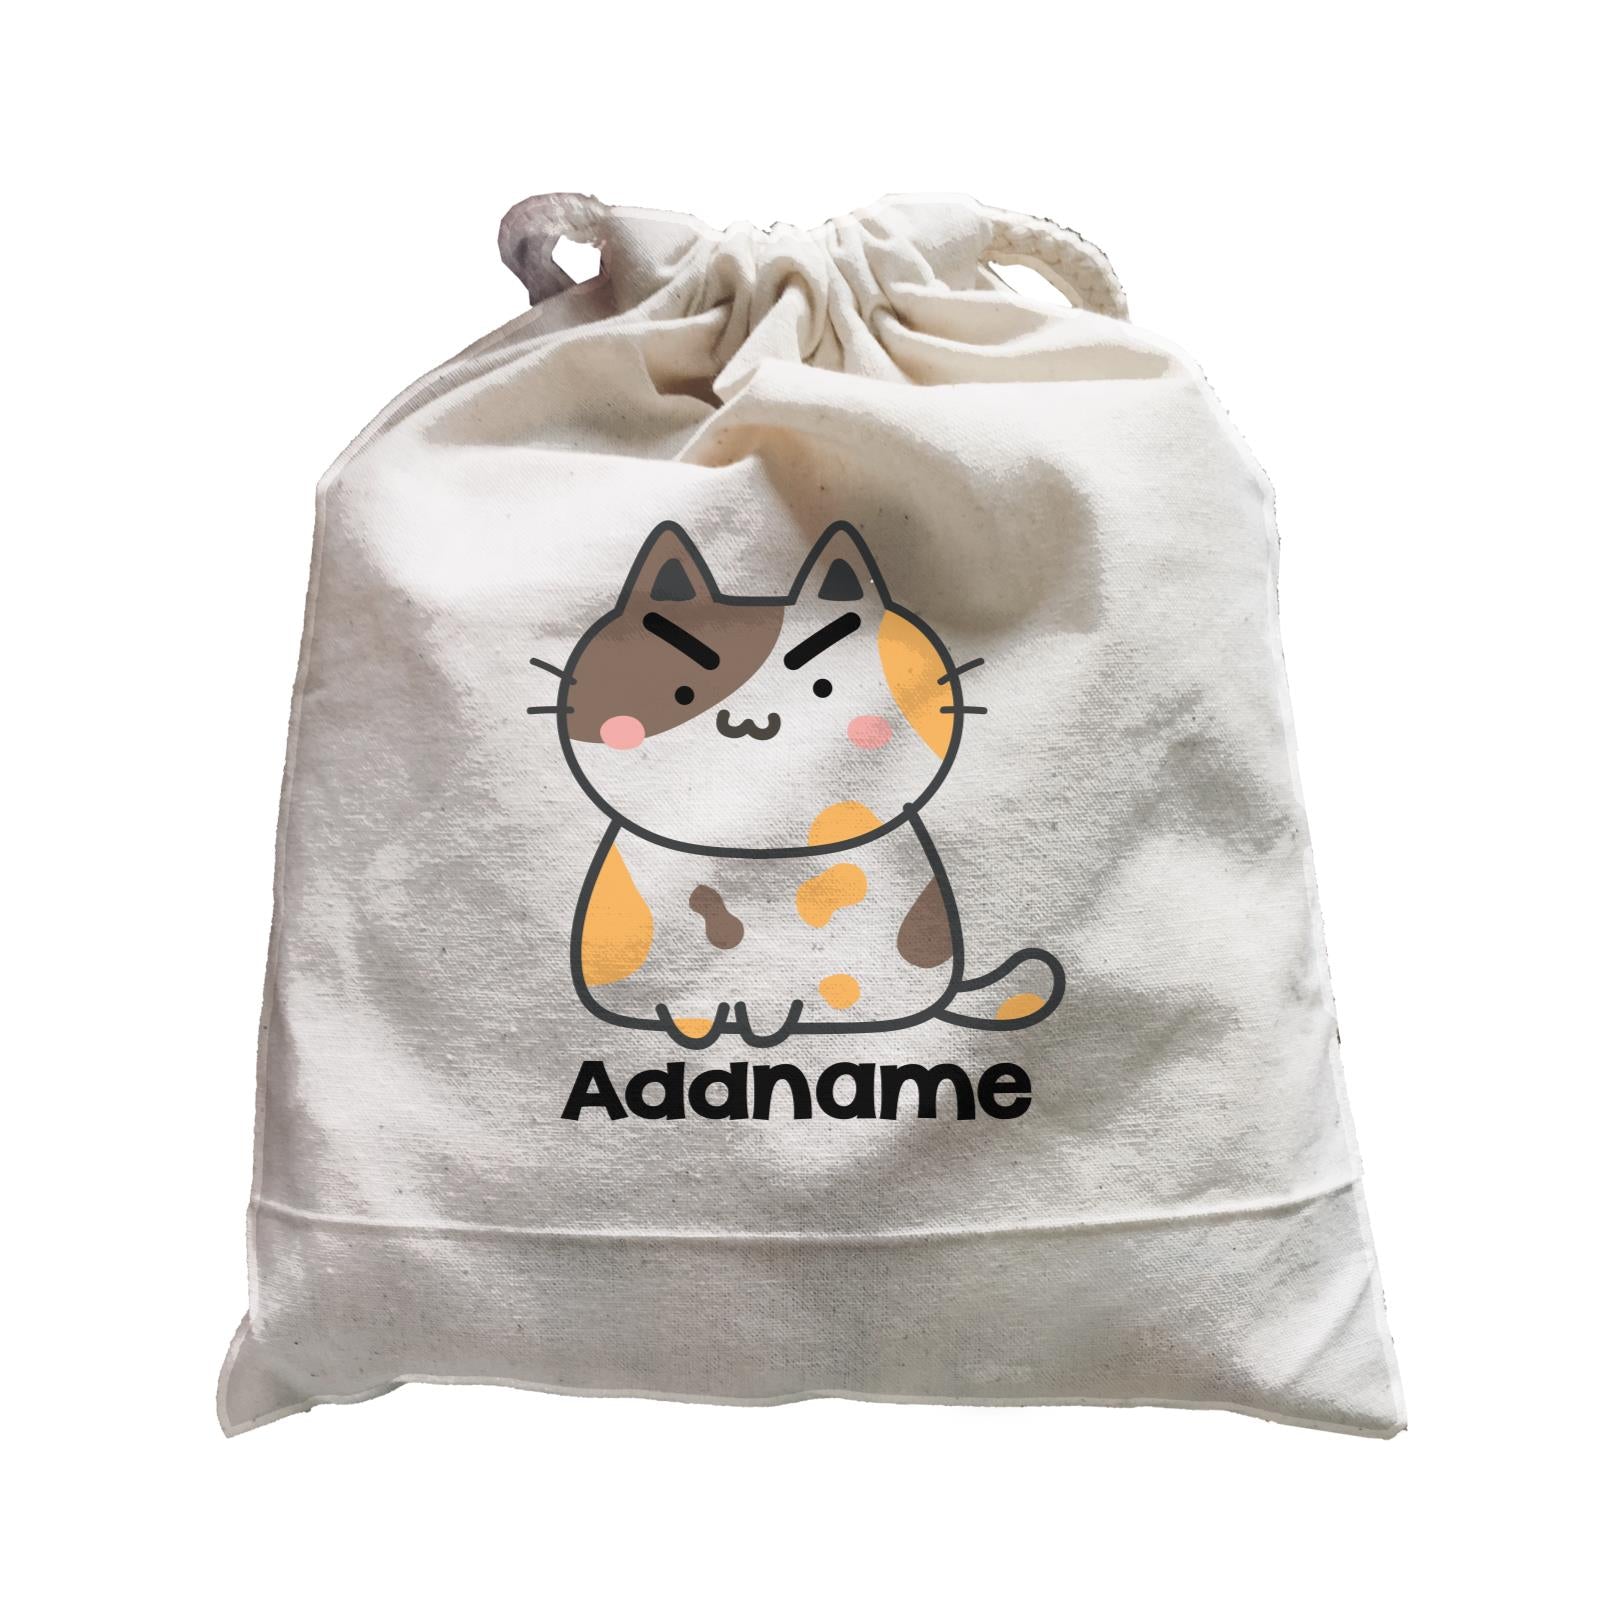 Drawn Adorable Cats Angry Cat Addname Satchel